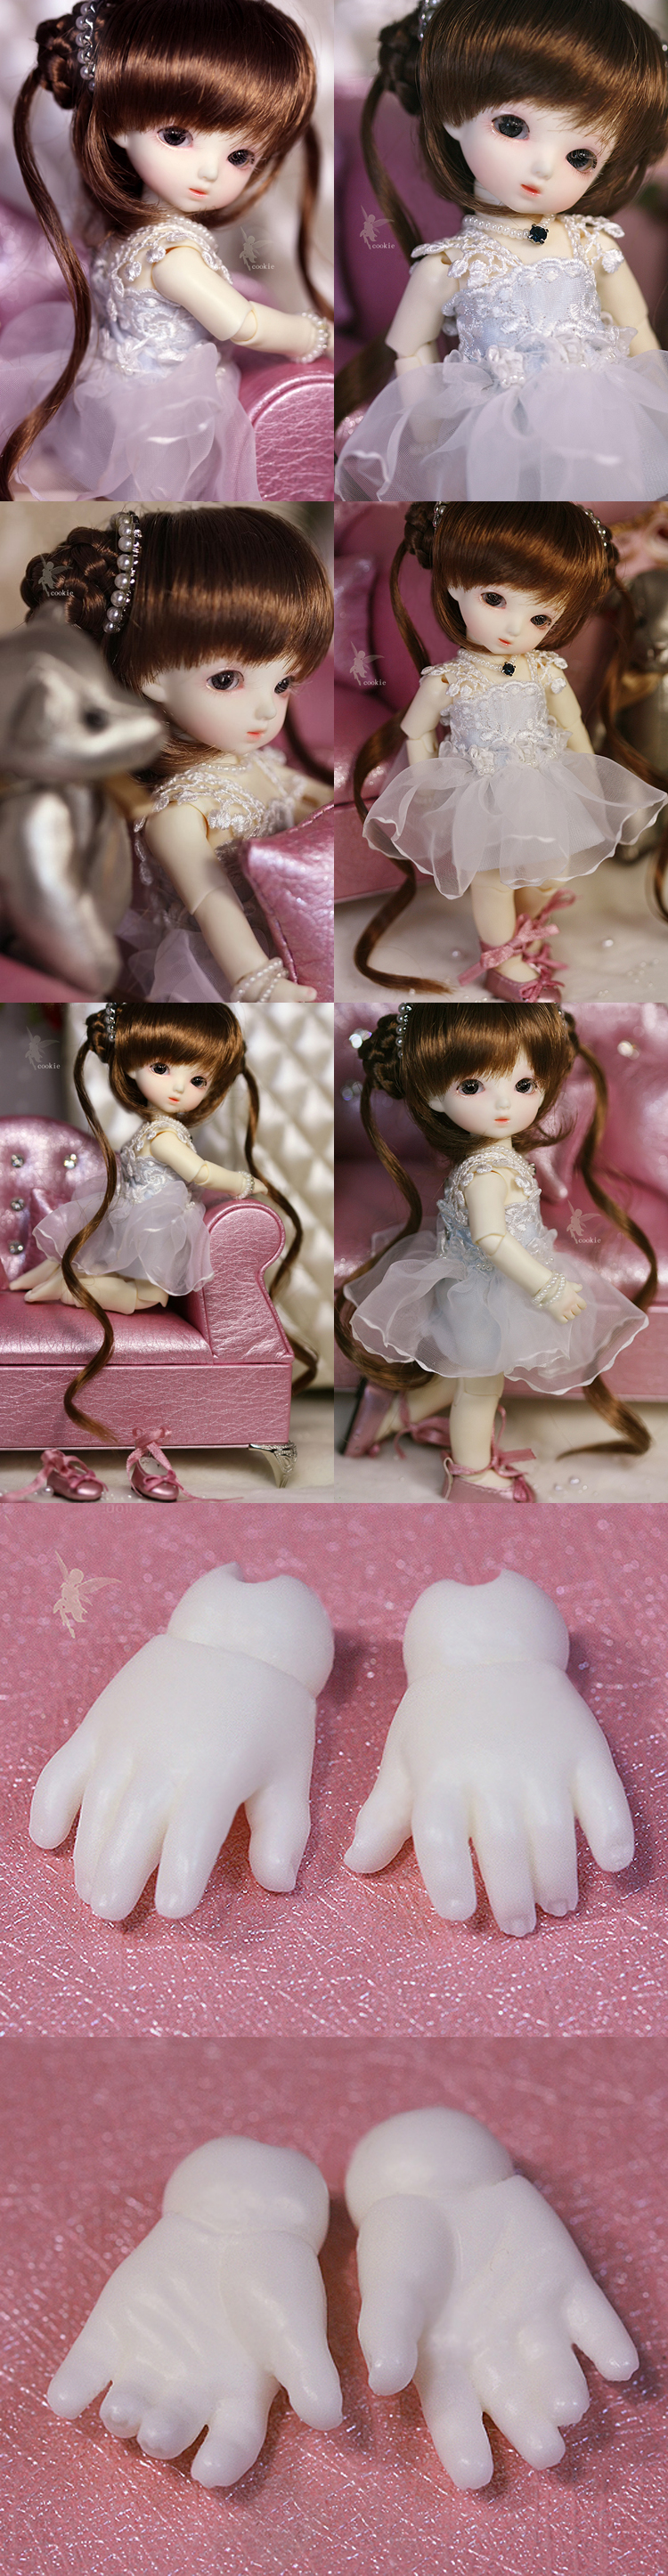 BJD Cookie 16cm Girl Ball-jointed Doll